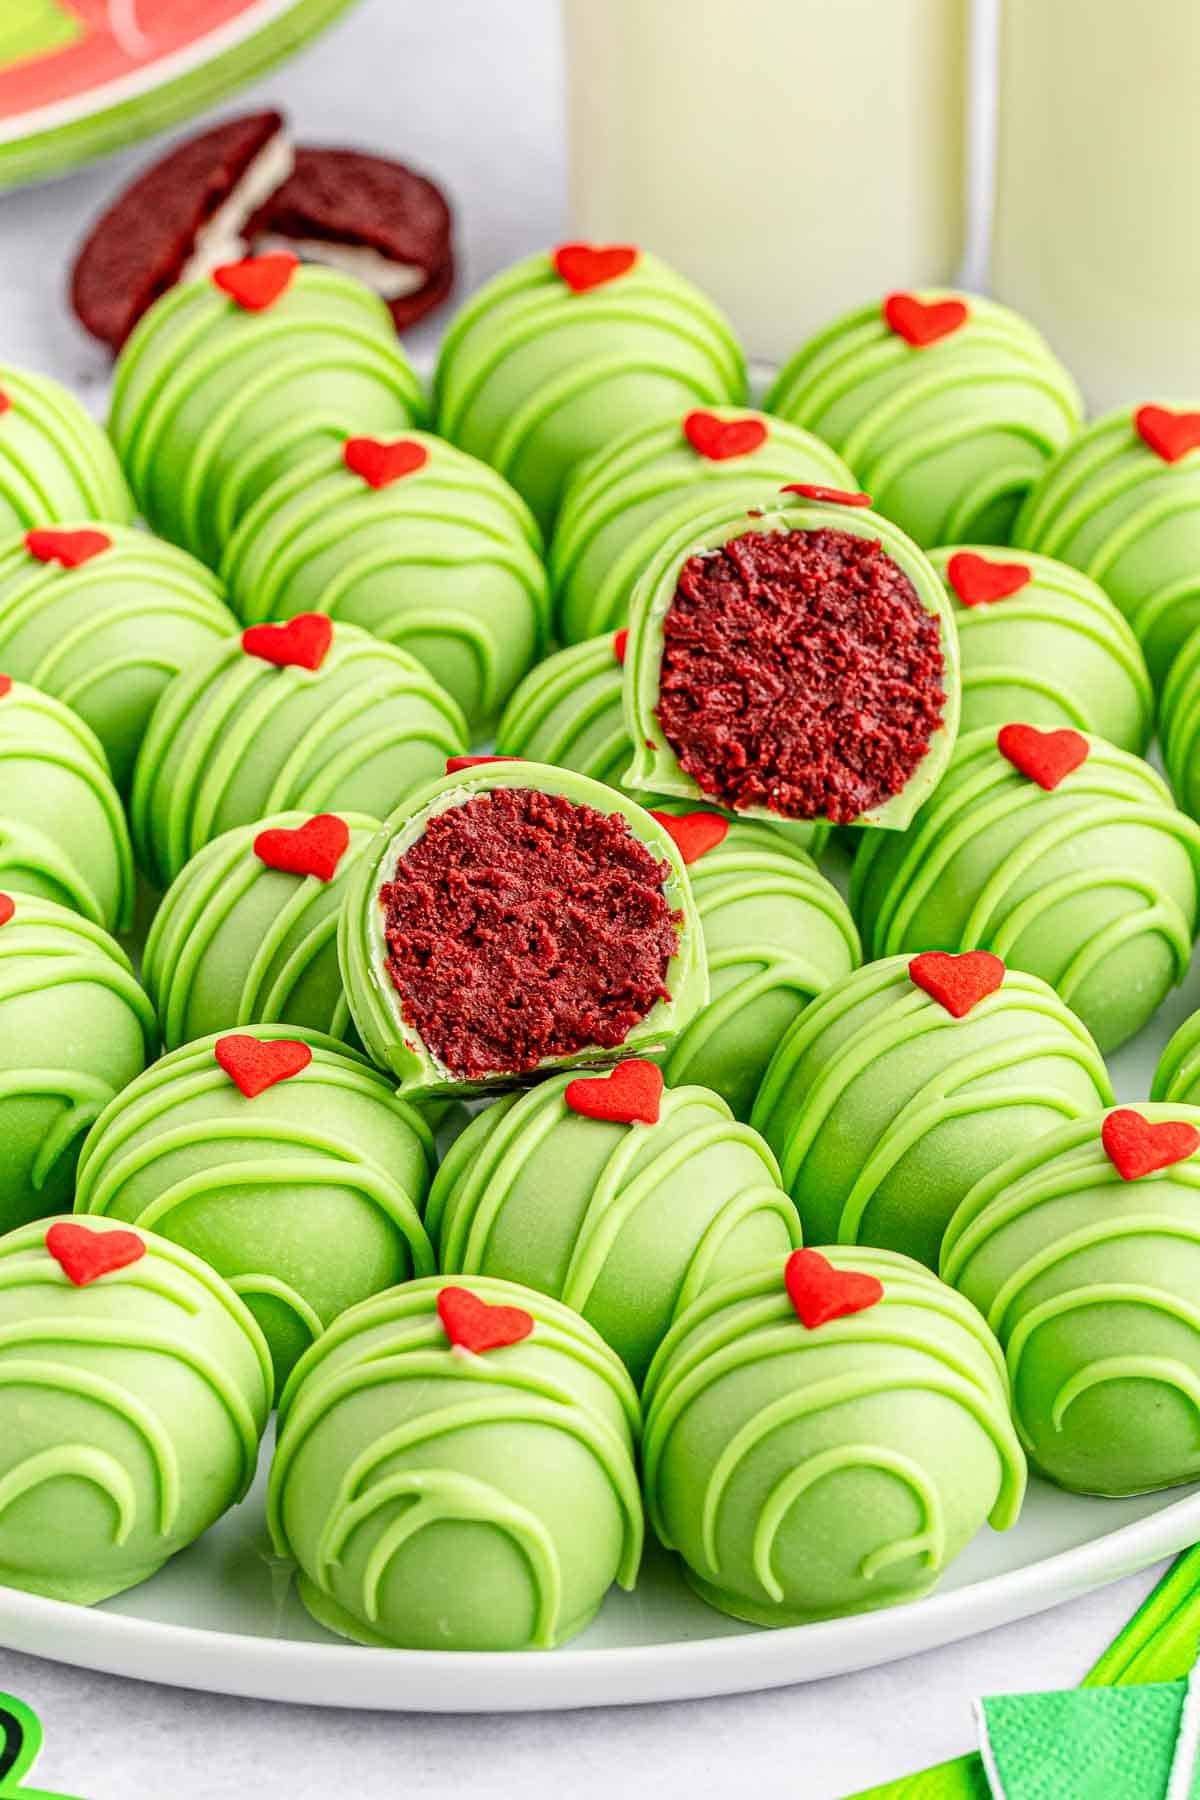 A white plate full of green grinch balls topped with a red candy heart with 2 sliced in half showing the red cookie center.